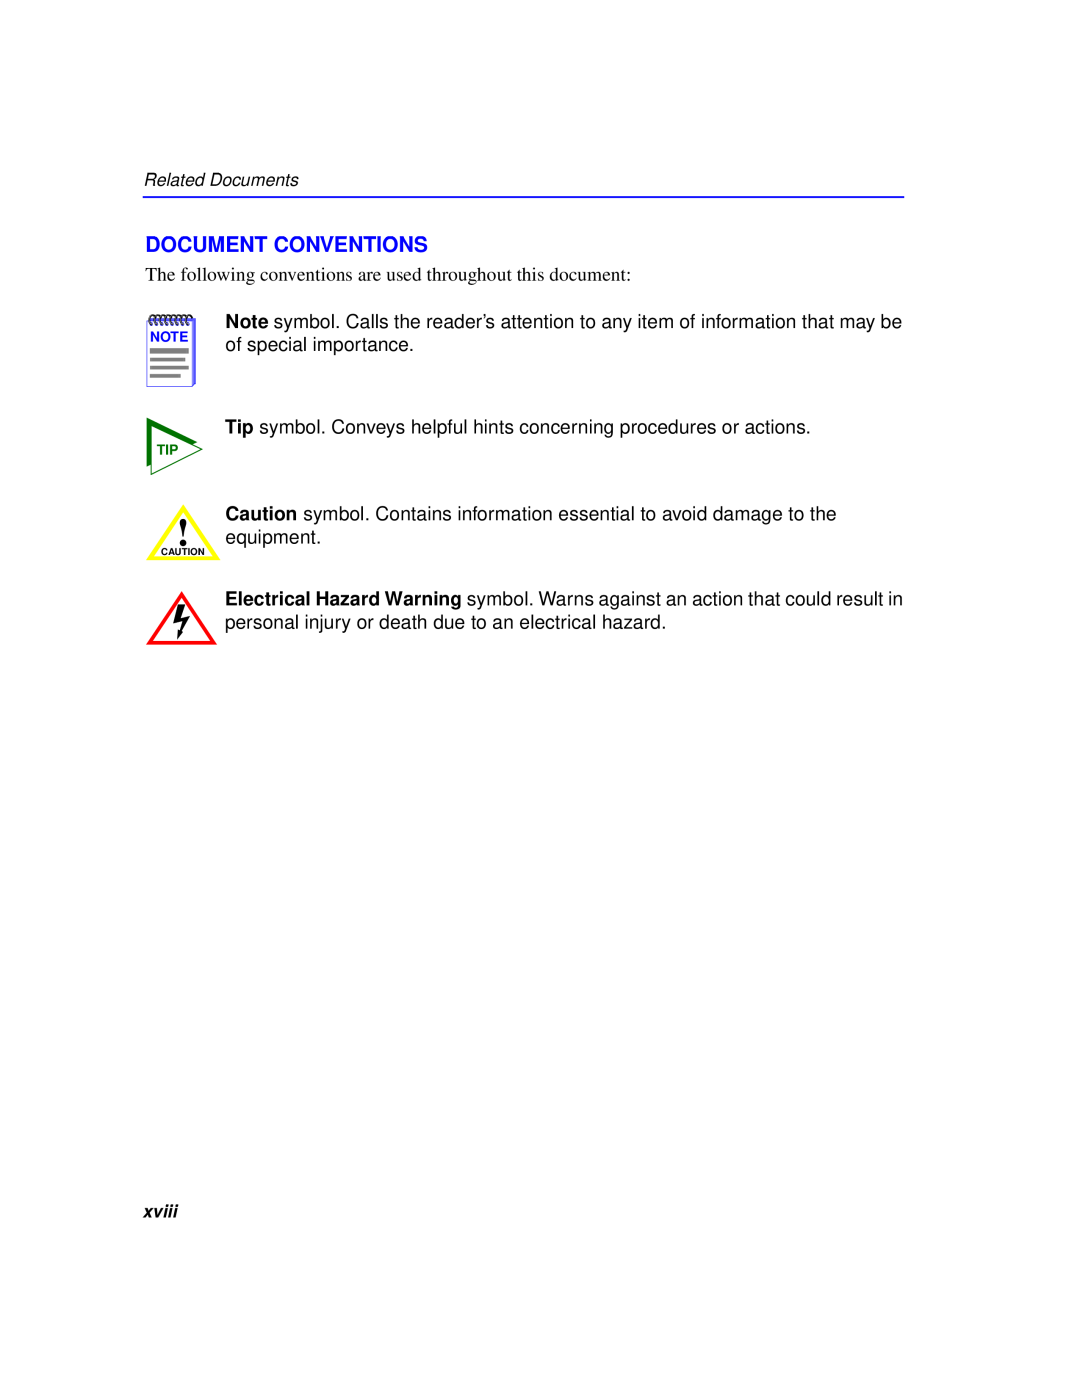 Cabletron Systems 6000 manual Document Conventions 